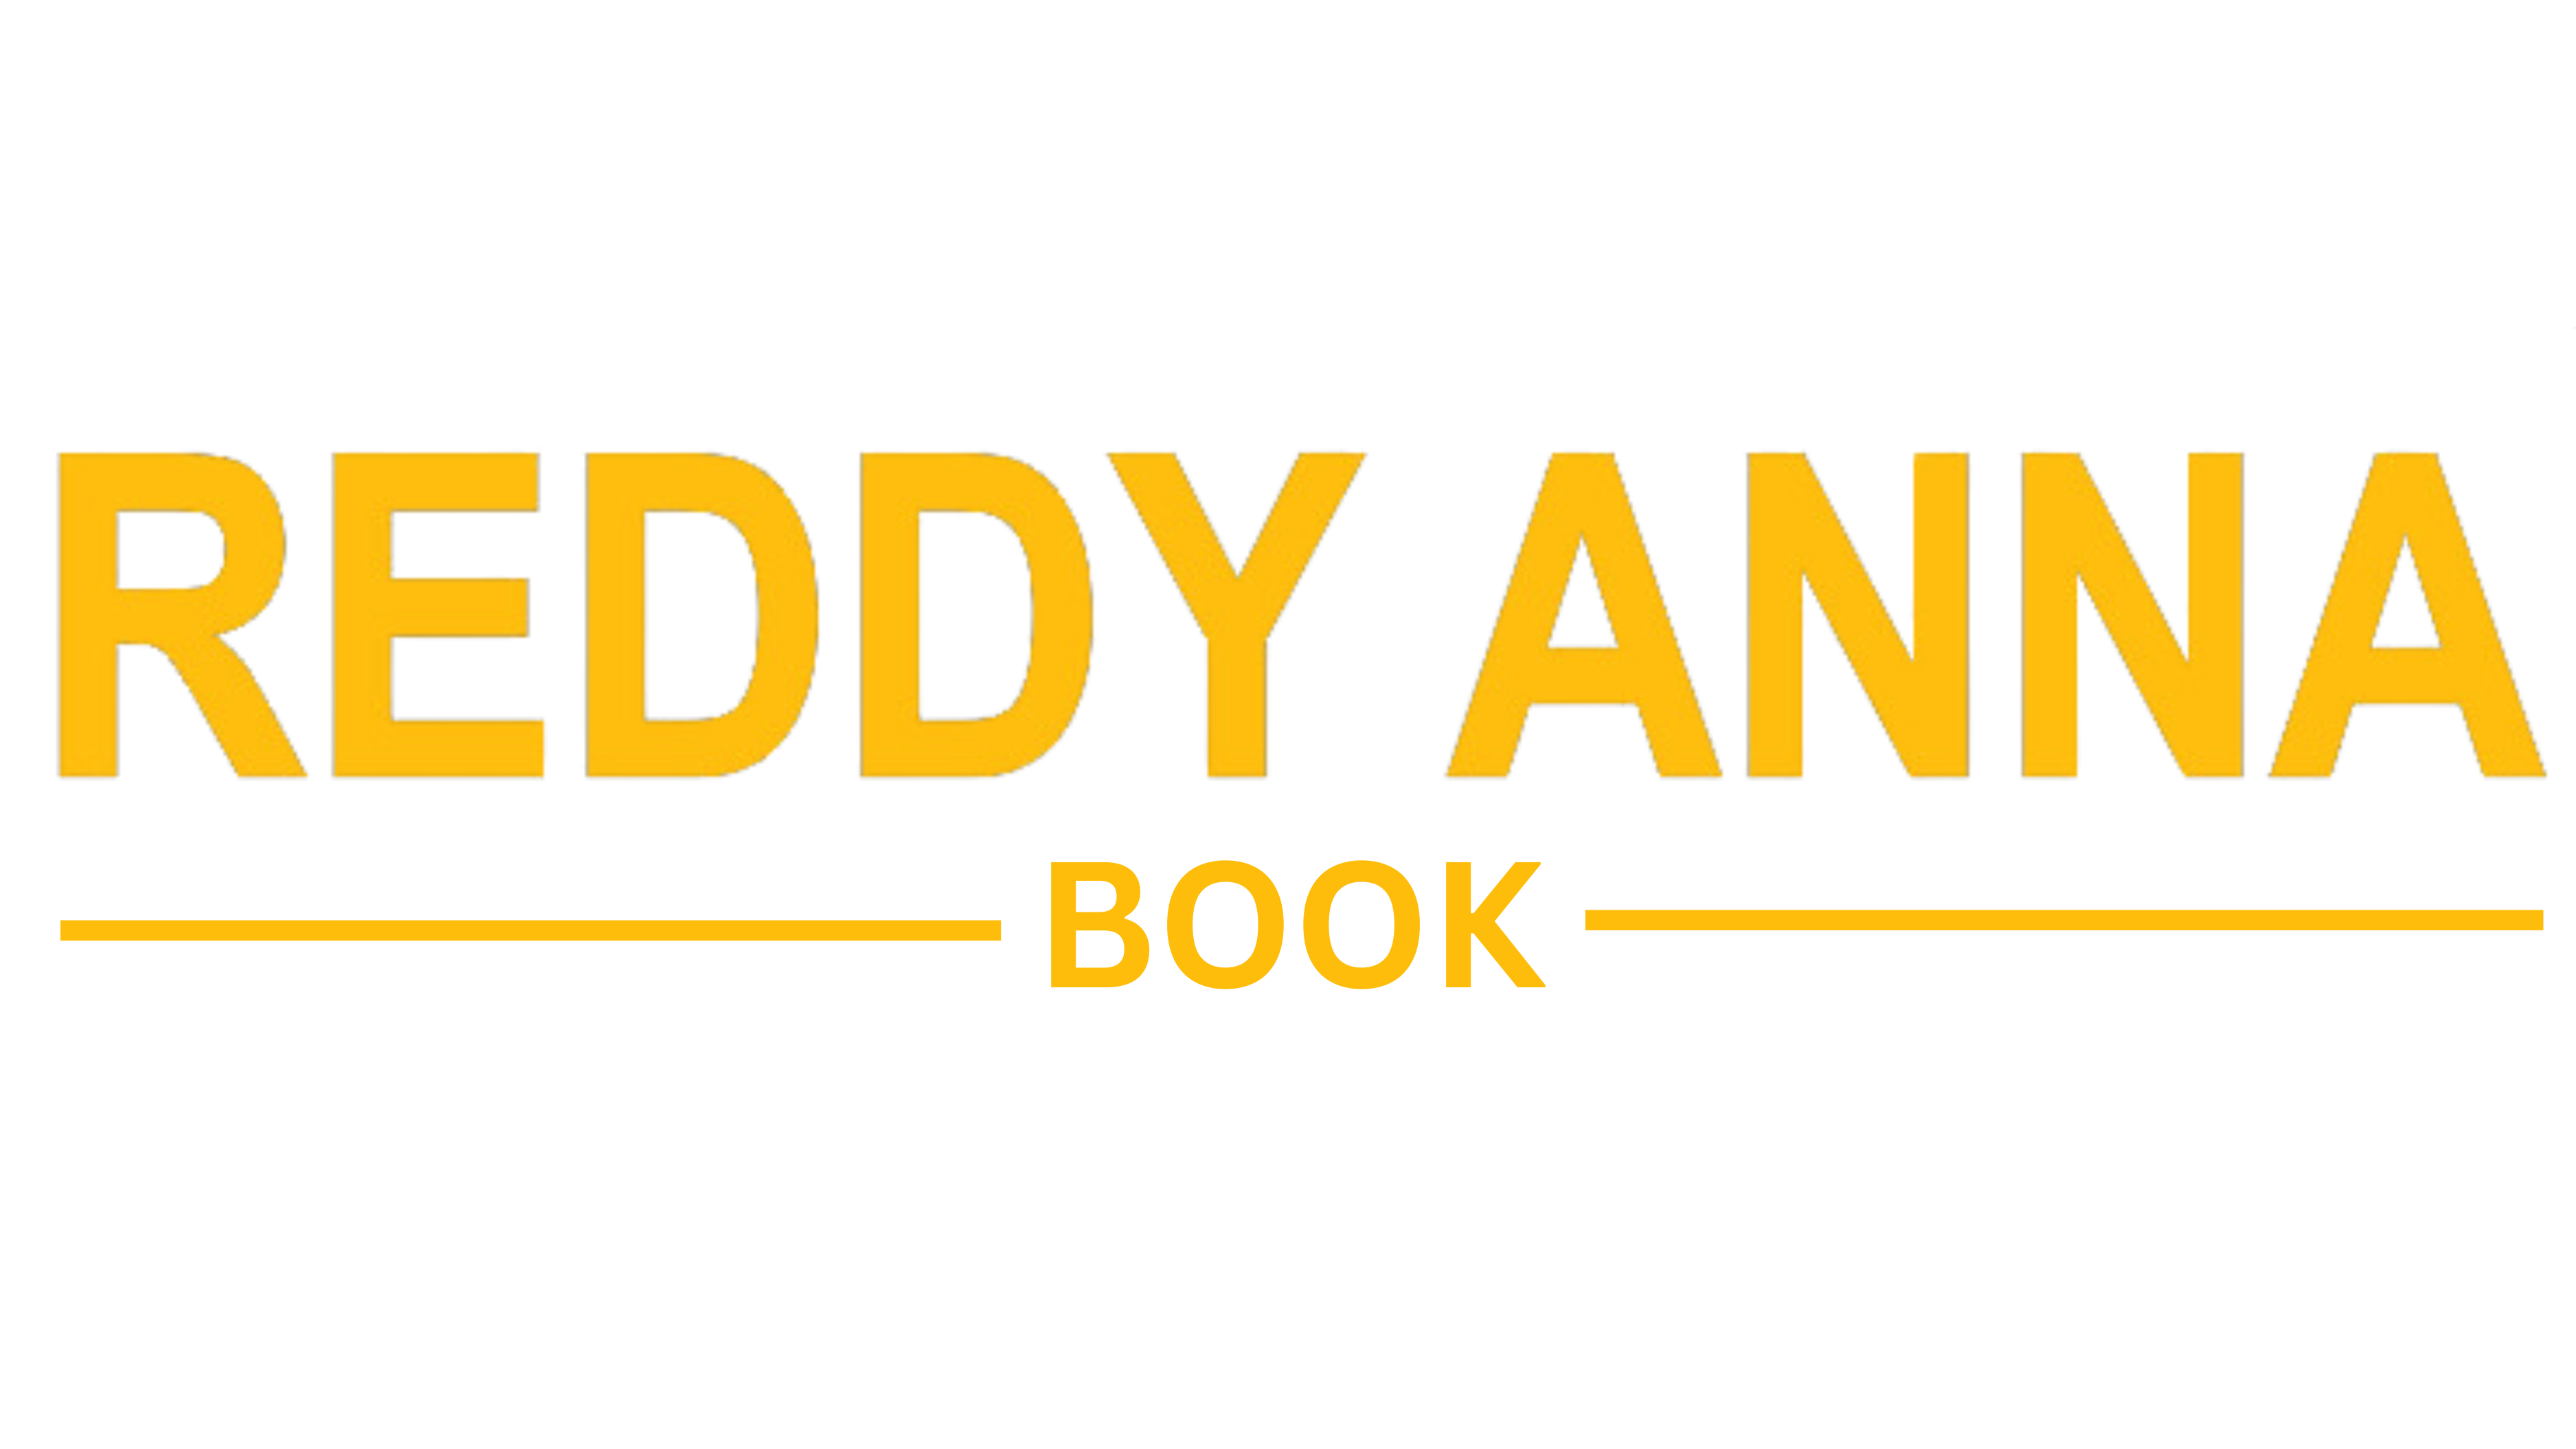 What games can I play on Reddy Anna | Reddy Anna Book